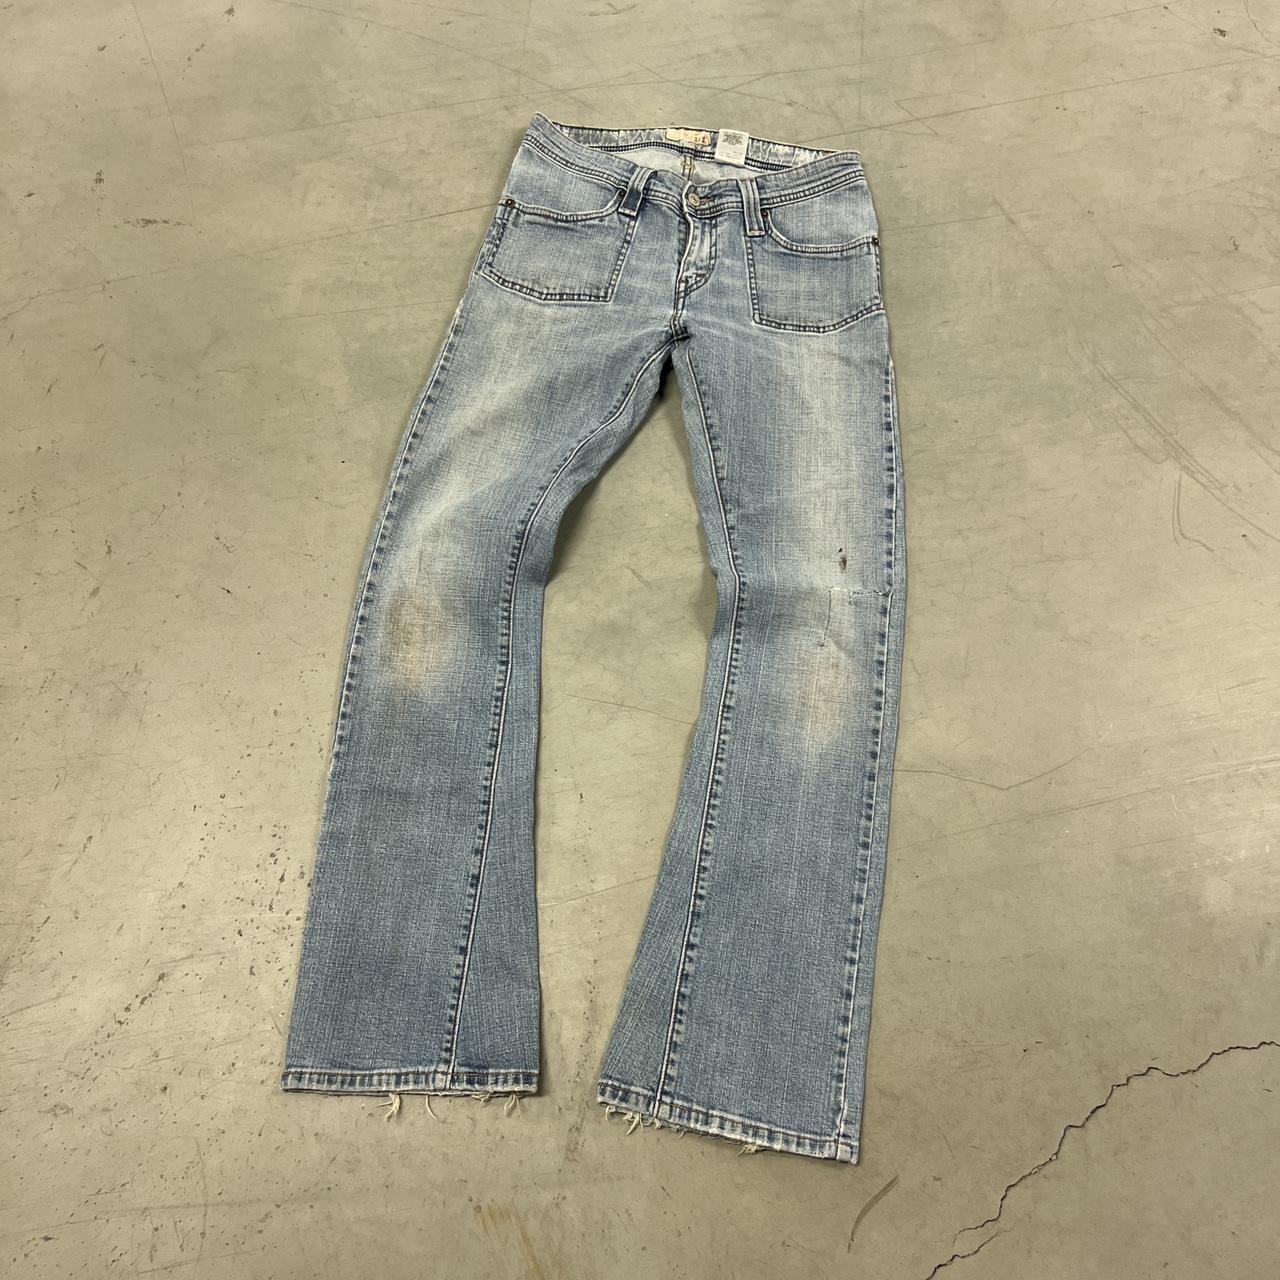 Men's White and Blue Jeans | Depop